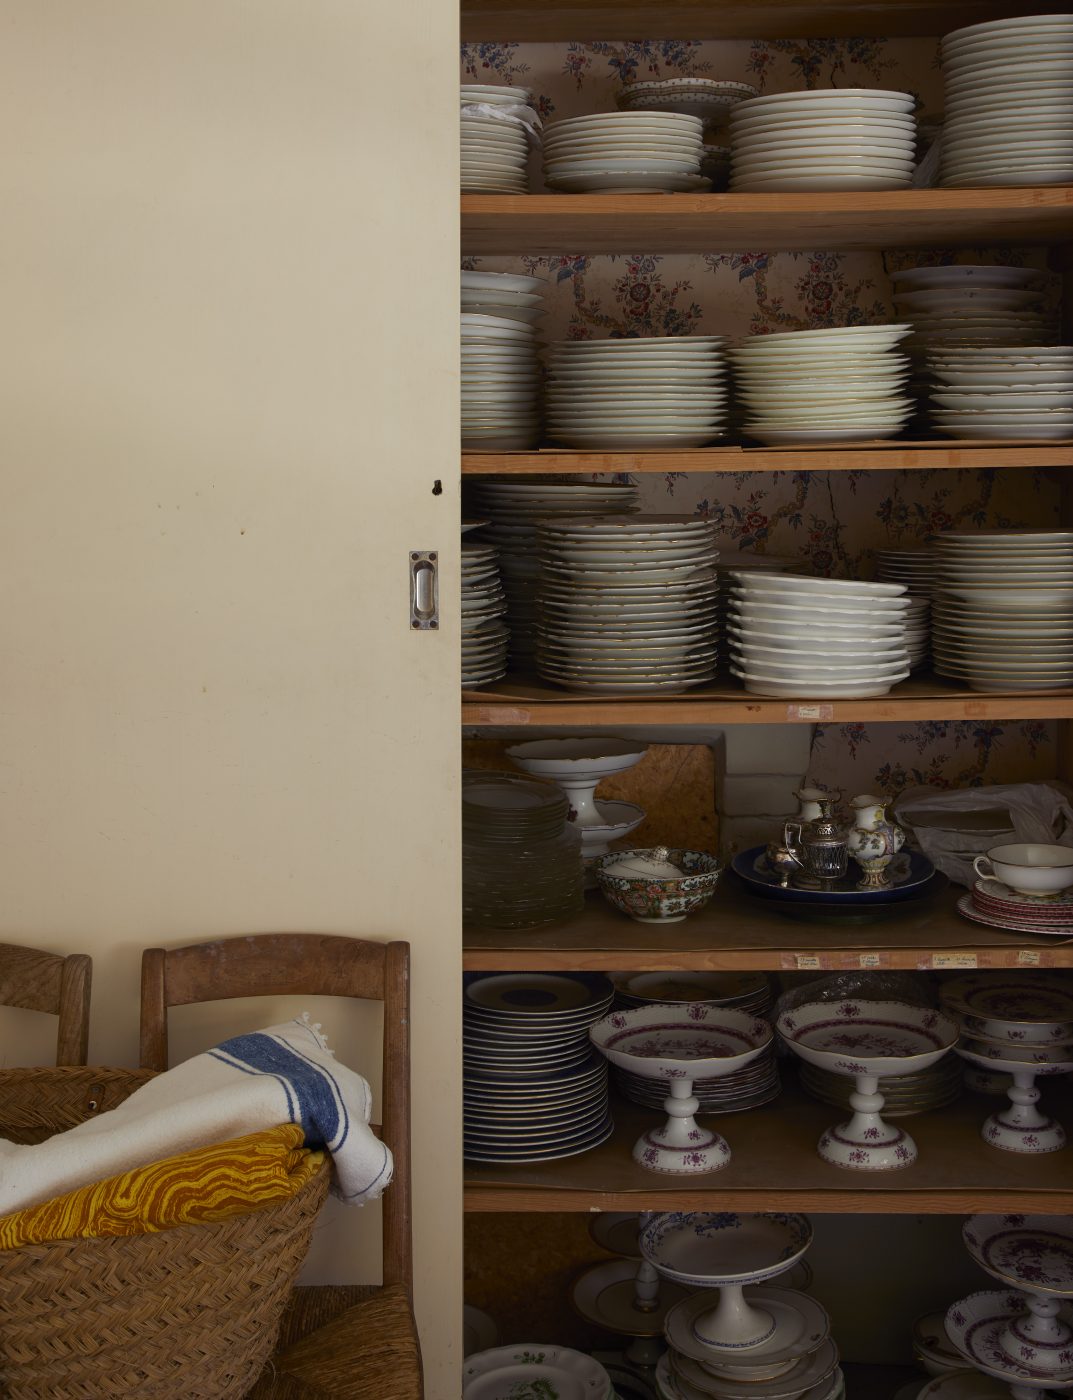 A cabinet with dinnerware